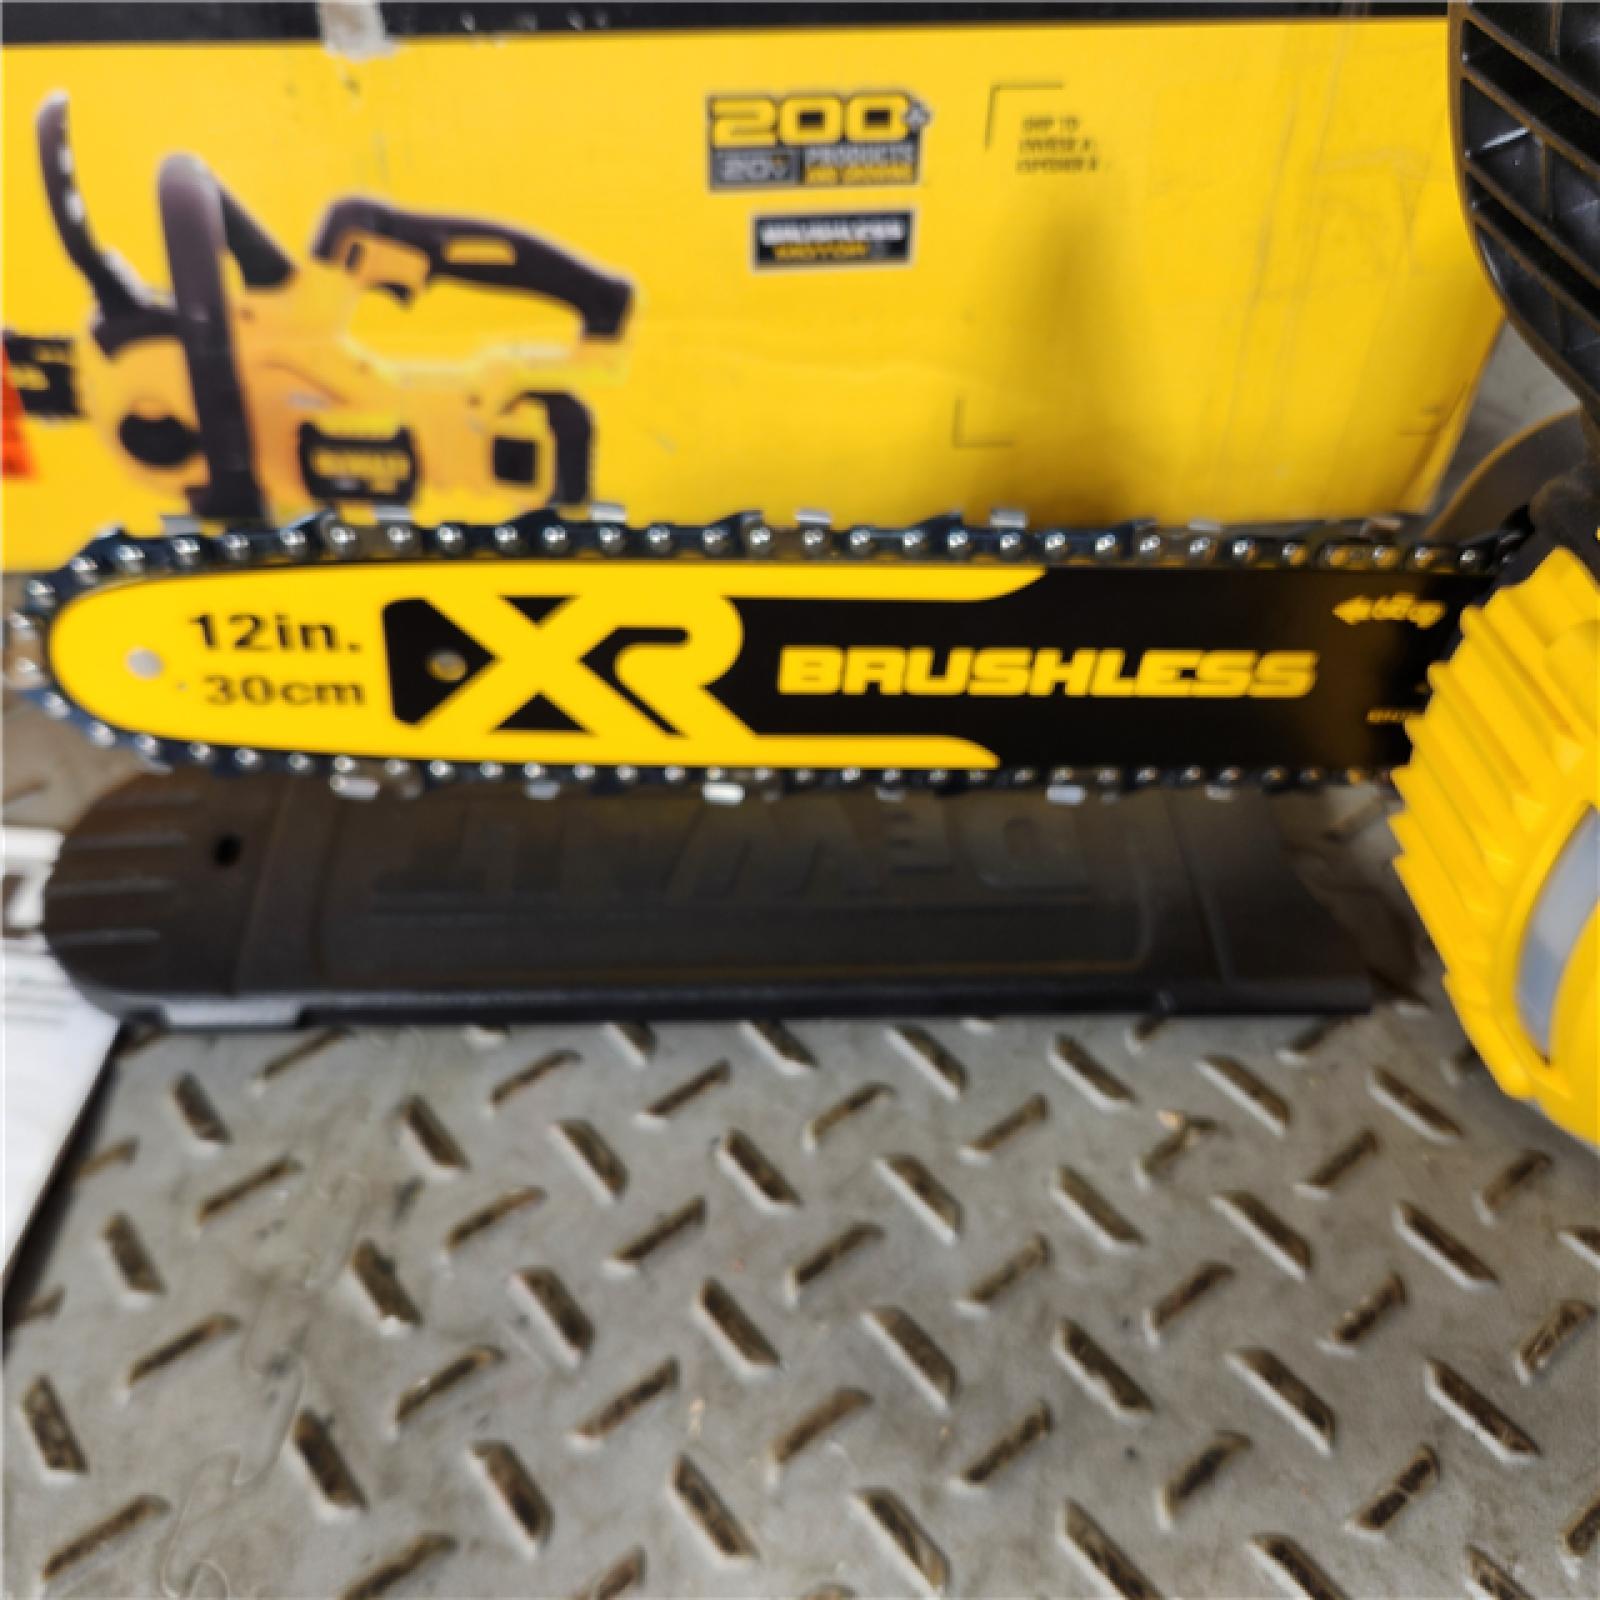 Houston Location - As-IS Dewalt 7605686 12 in. 20V Battery Powered Chainsaw - Appears IN NEW Condition